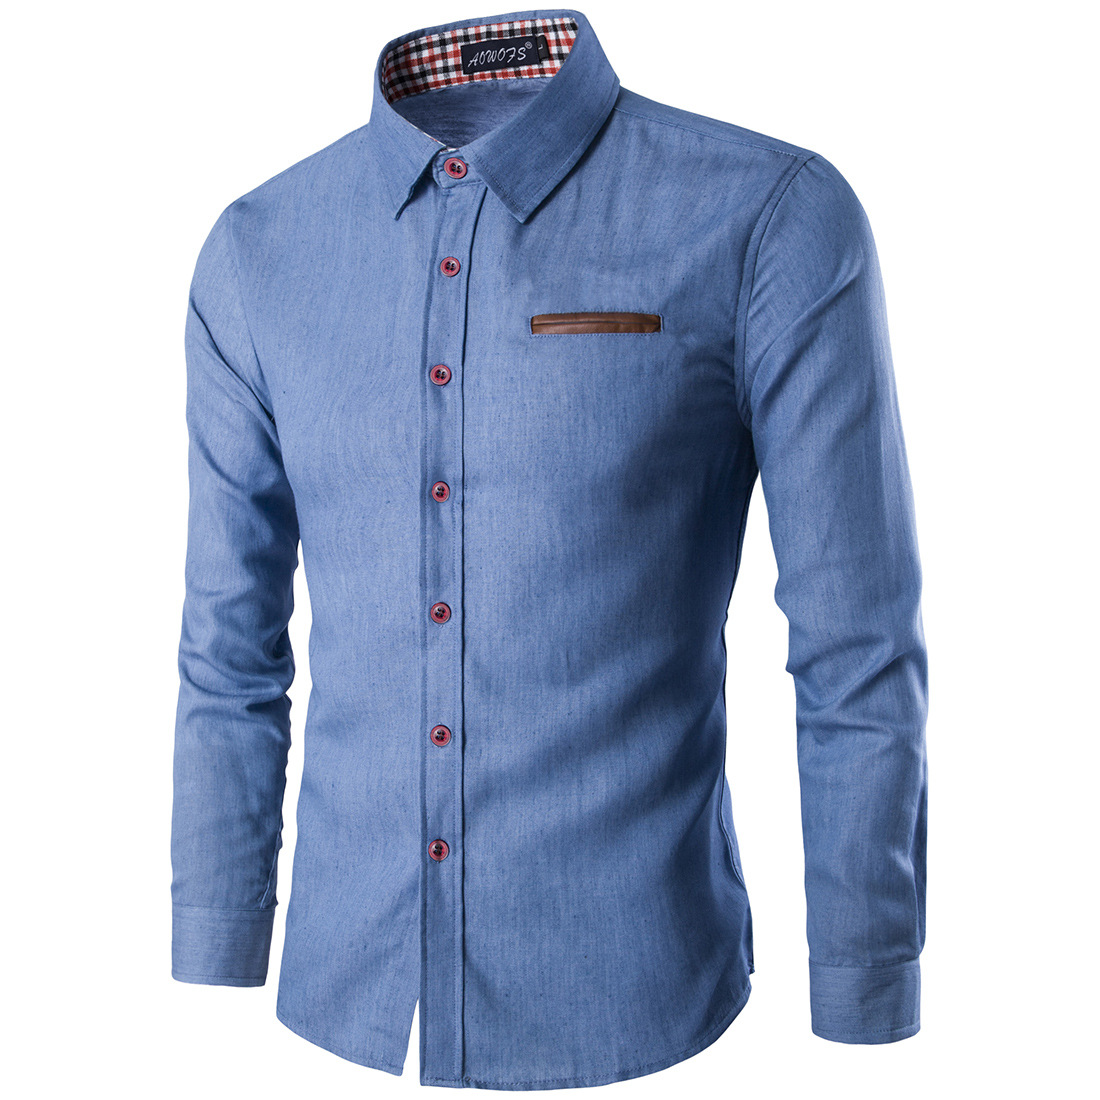 New Men Casual Fashion Wash Denim Shirts Long Sleeves Smart Casual Slim Fit Jeans Clothes